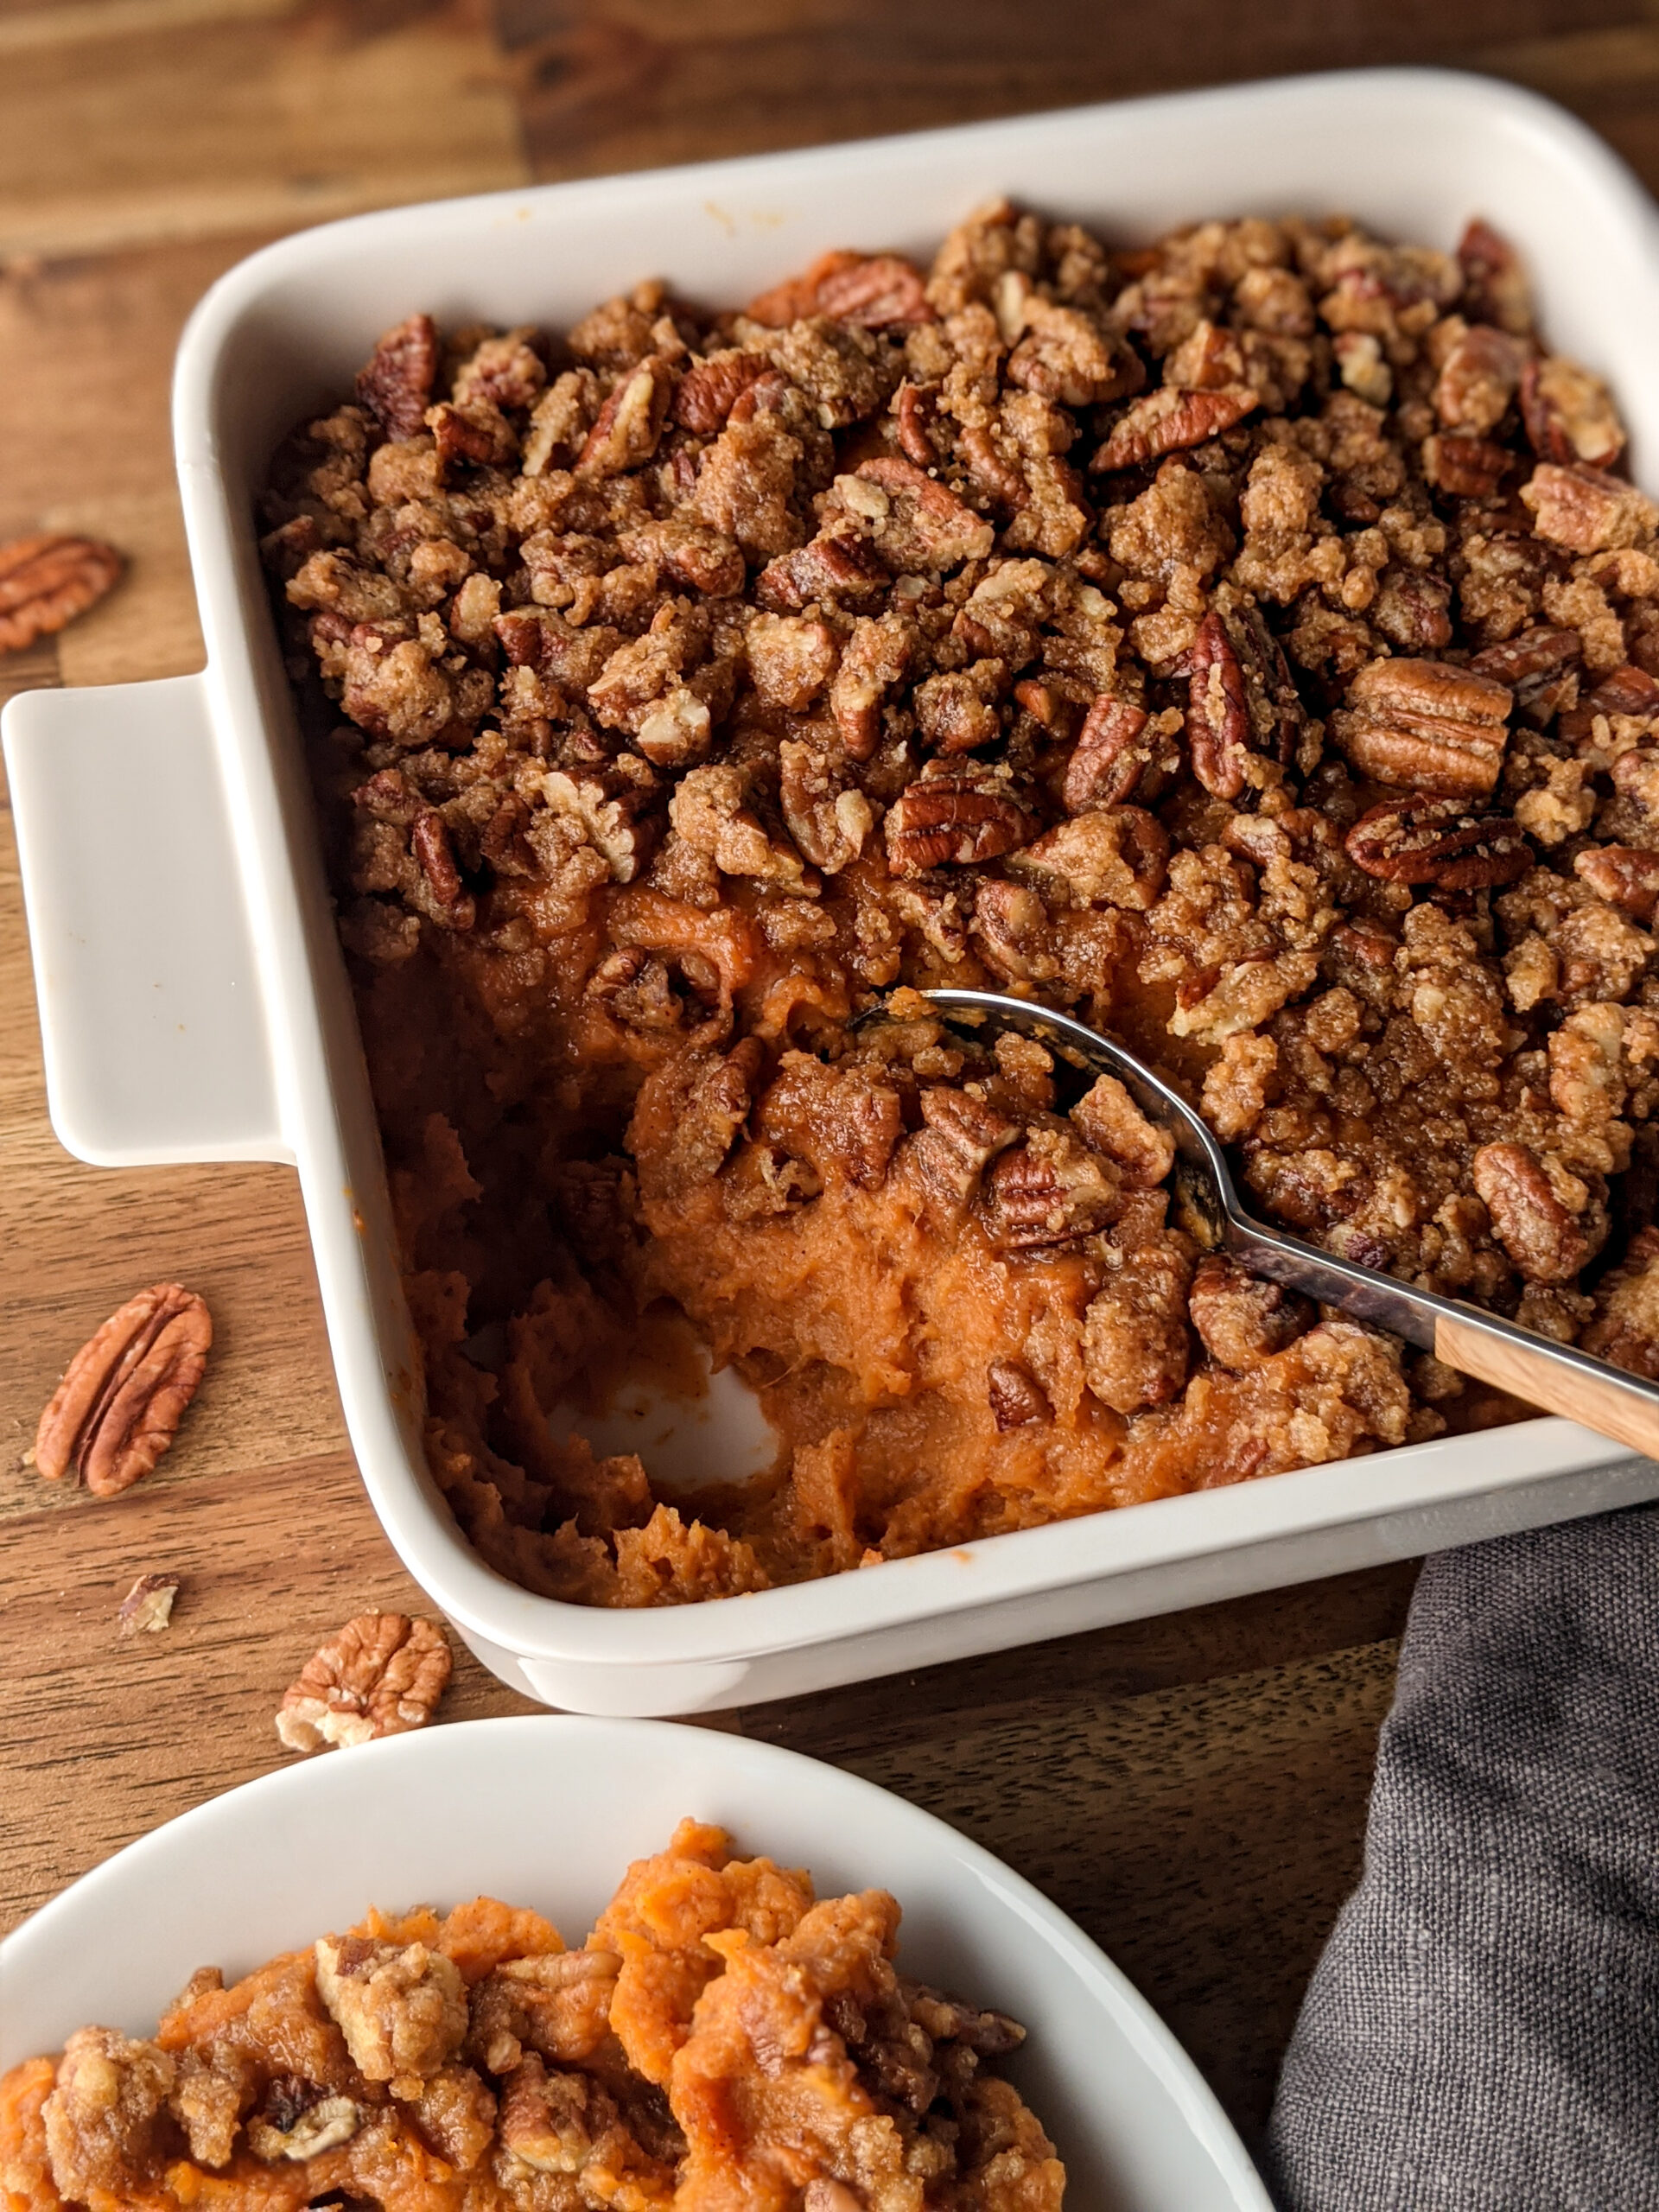 Sweet Potato Casserole with Candied Pecan Crumble - She likes greens